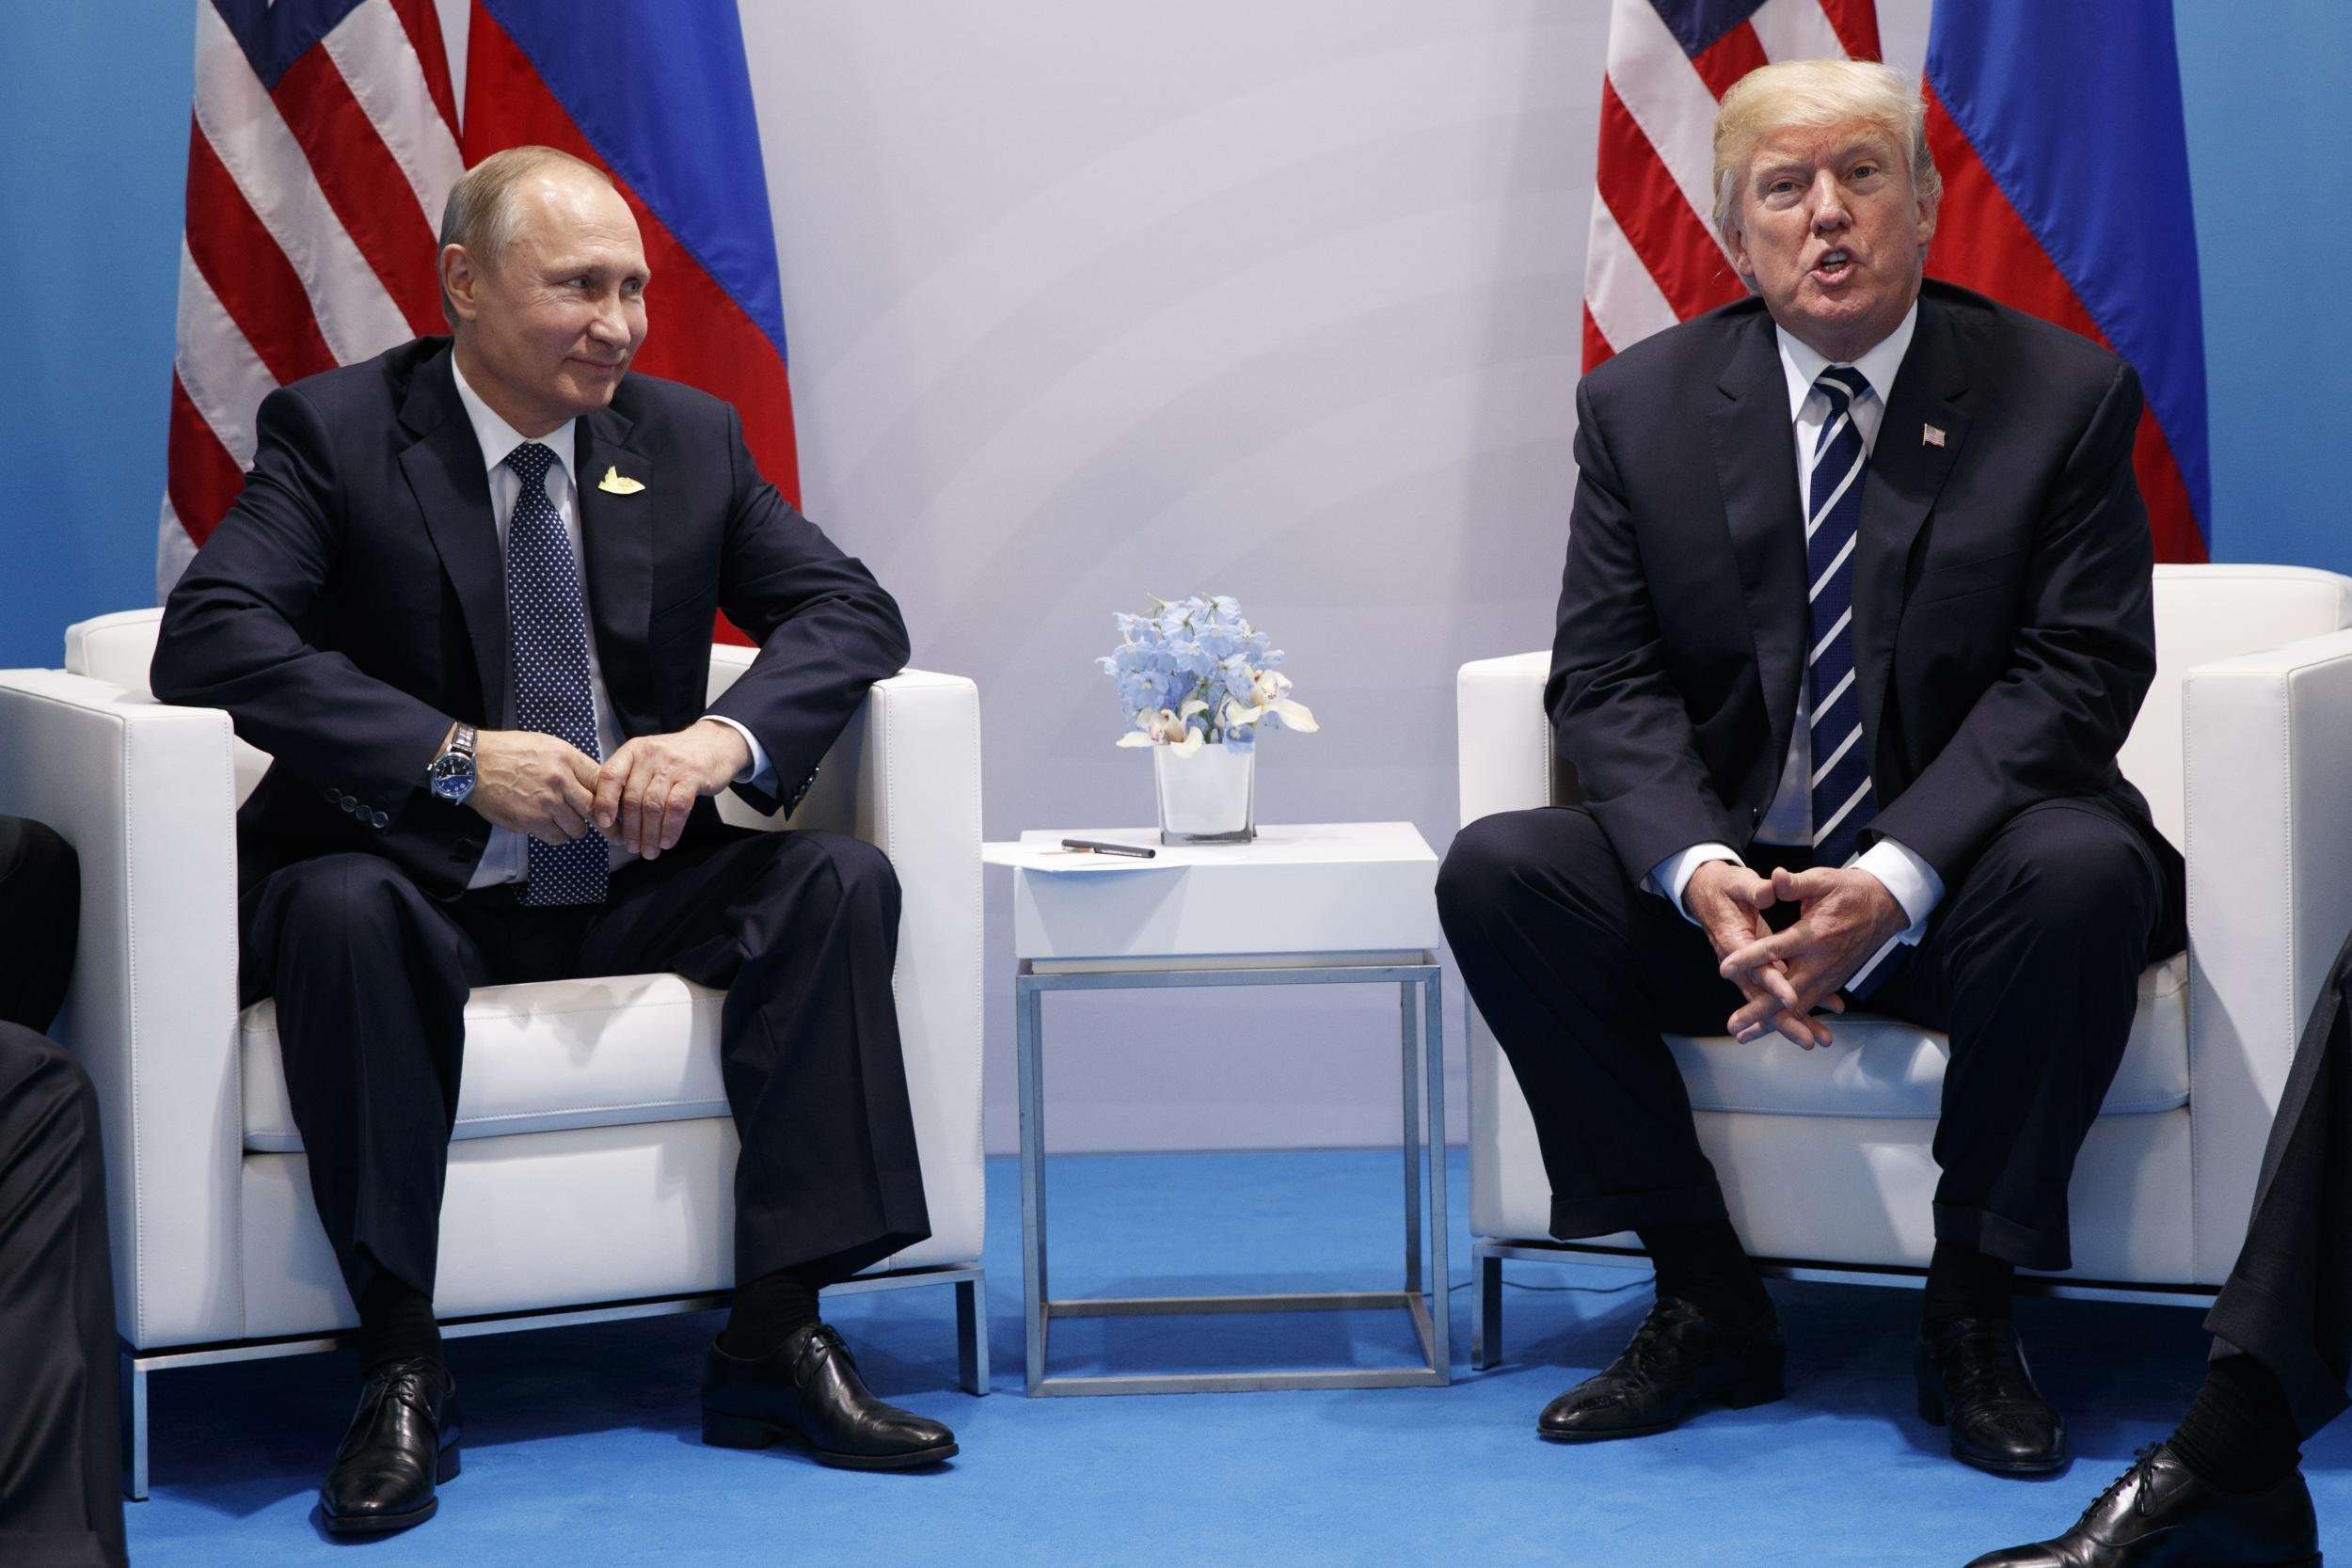 image for Putin points at journalists and asks Trump 'are these the ones hurting you?' during press conference